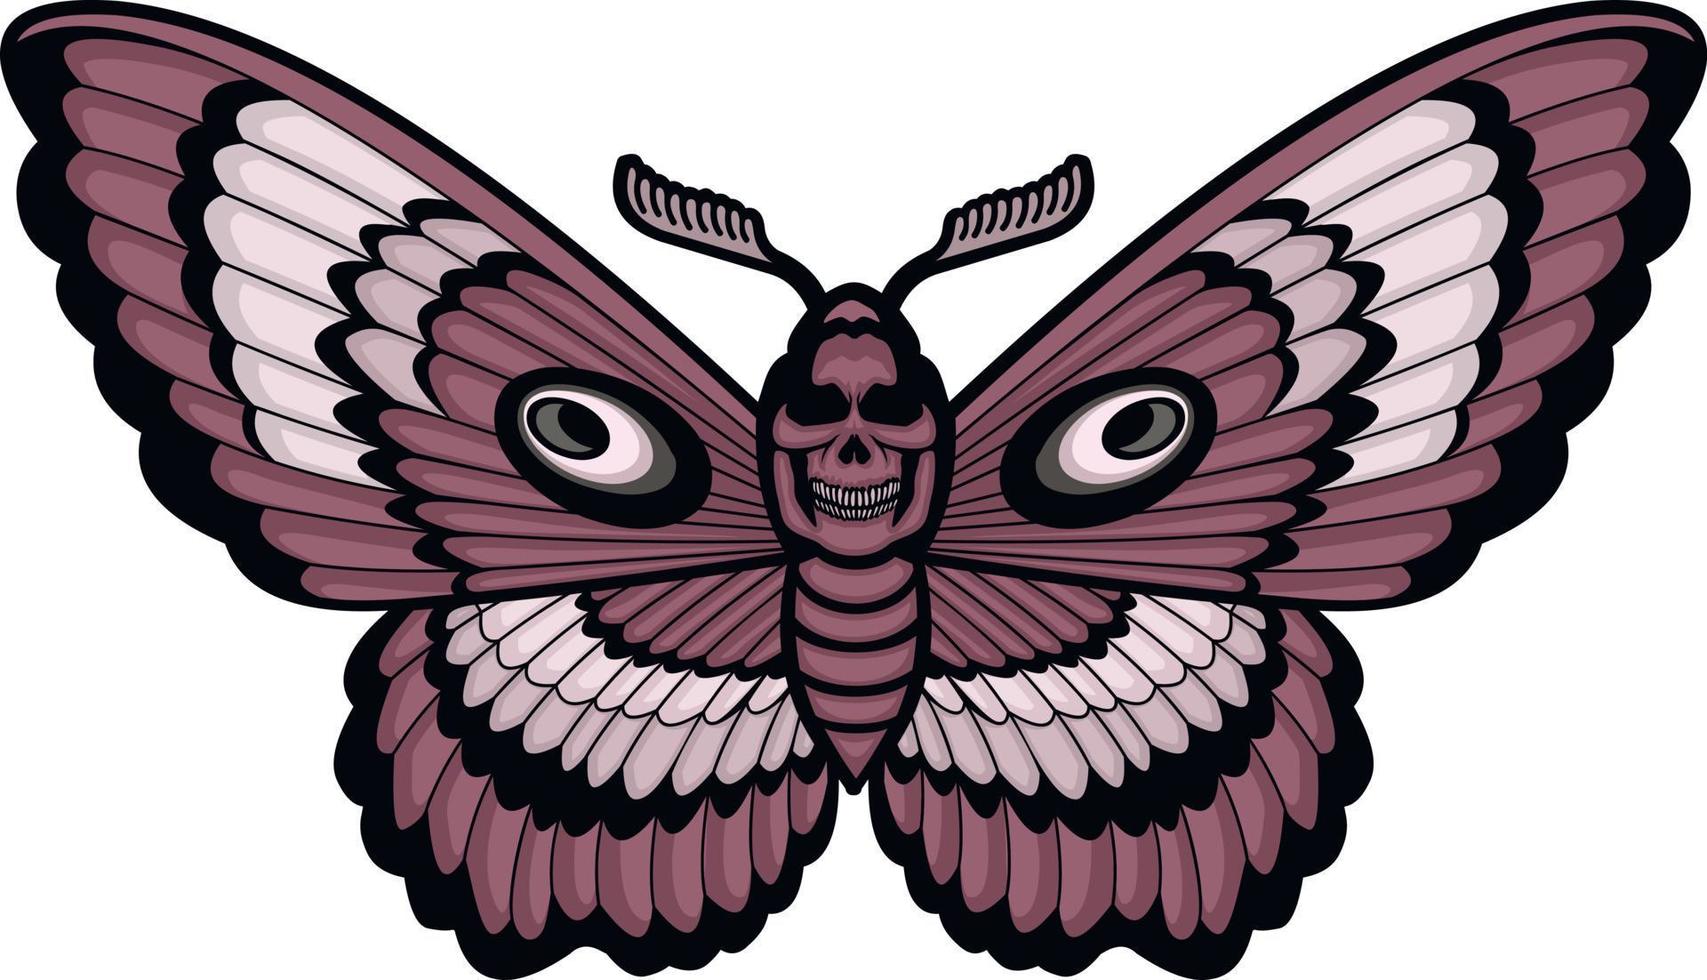 Death's-head hawkmoth with skull, grunge vintage design t shirts vector